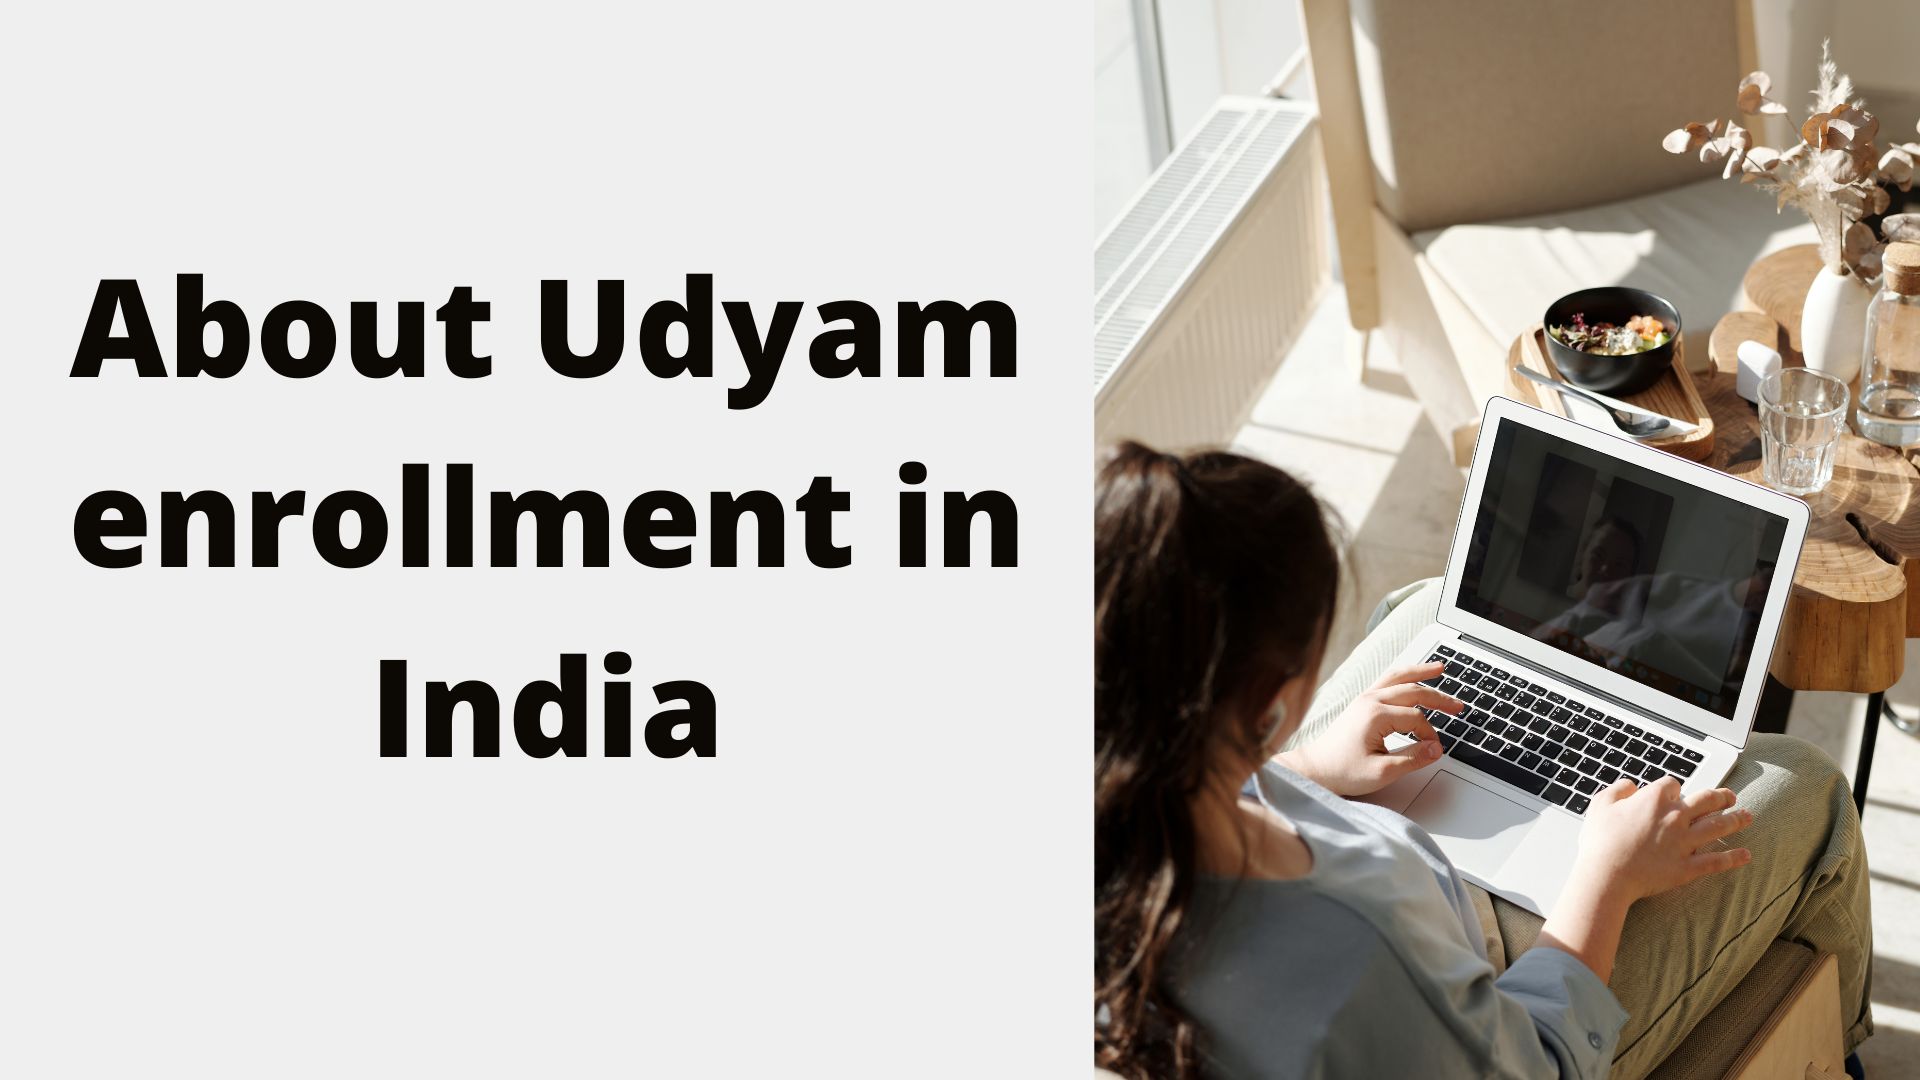 About Udyam enrollment in India